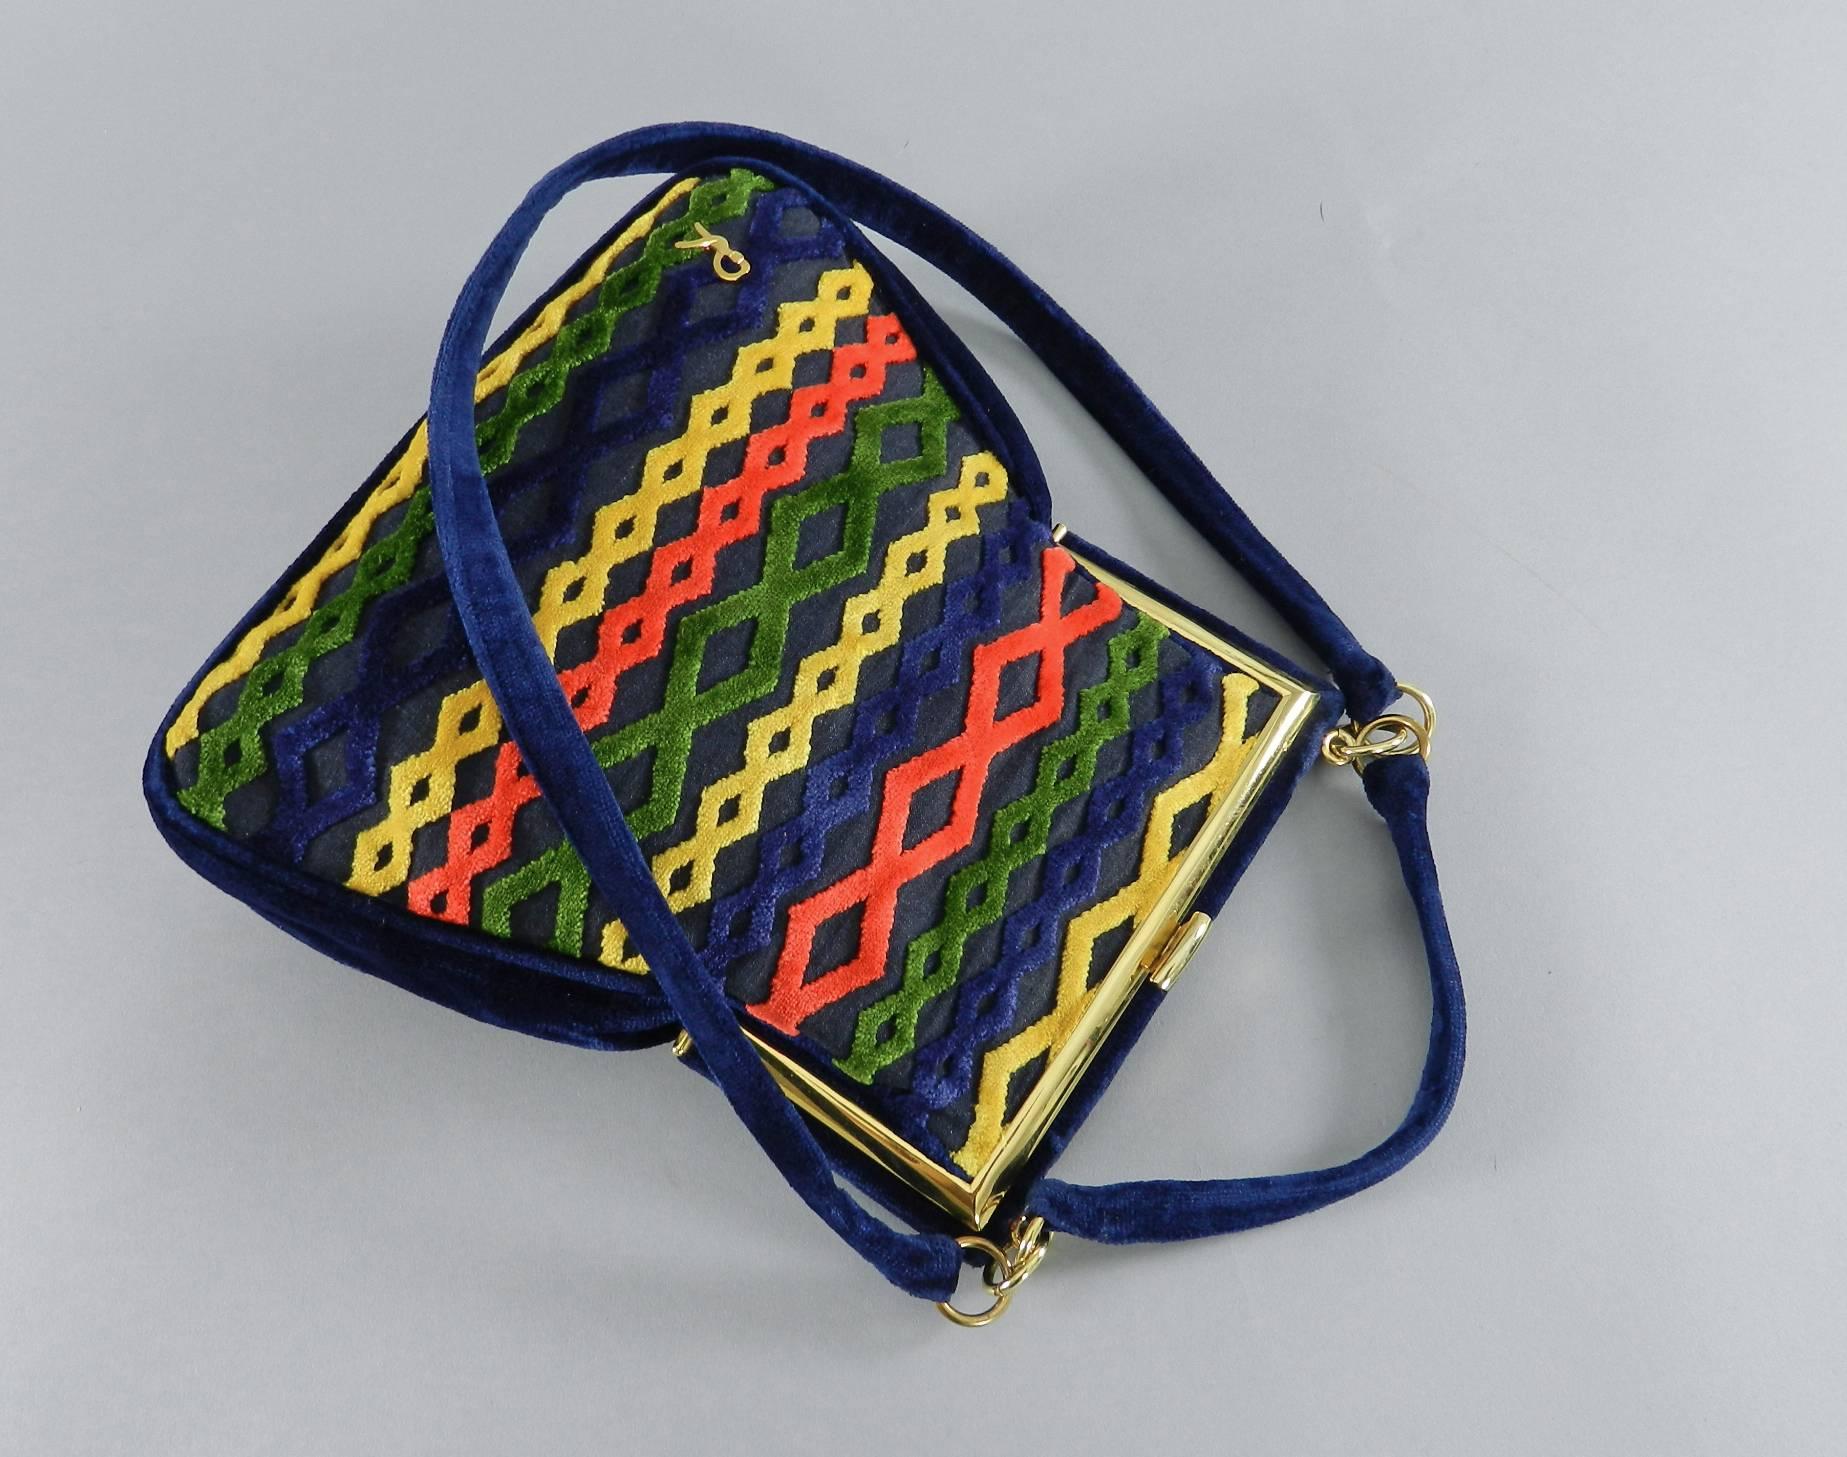 Vintage 1960's Roberta di Camerino cut velvet bag. Dark blue, yellow, green, red with goldtone metal hardware. Excellent clean vintage condition. Original vintage and not a modern re-issue. Body of bag measures about 10 x 10 x 2